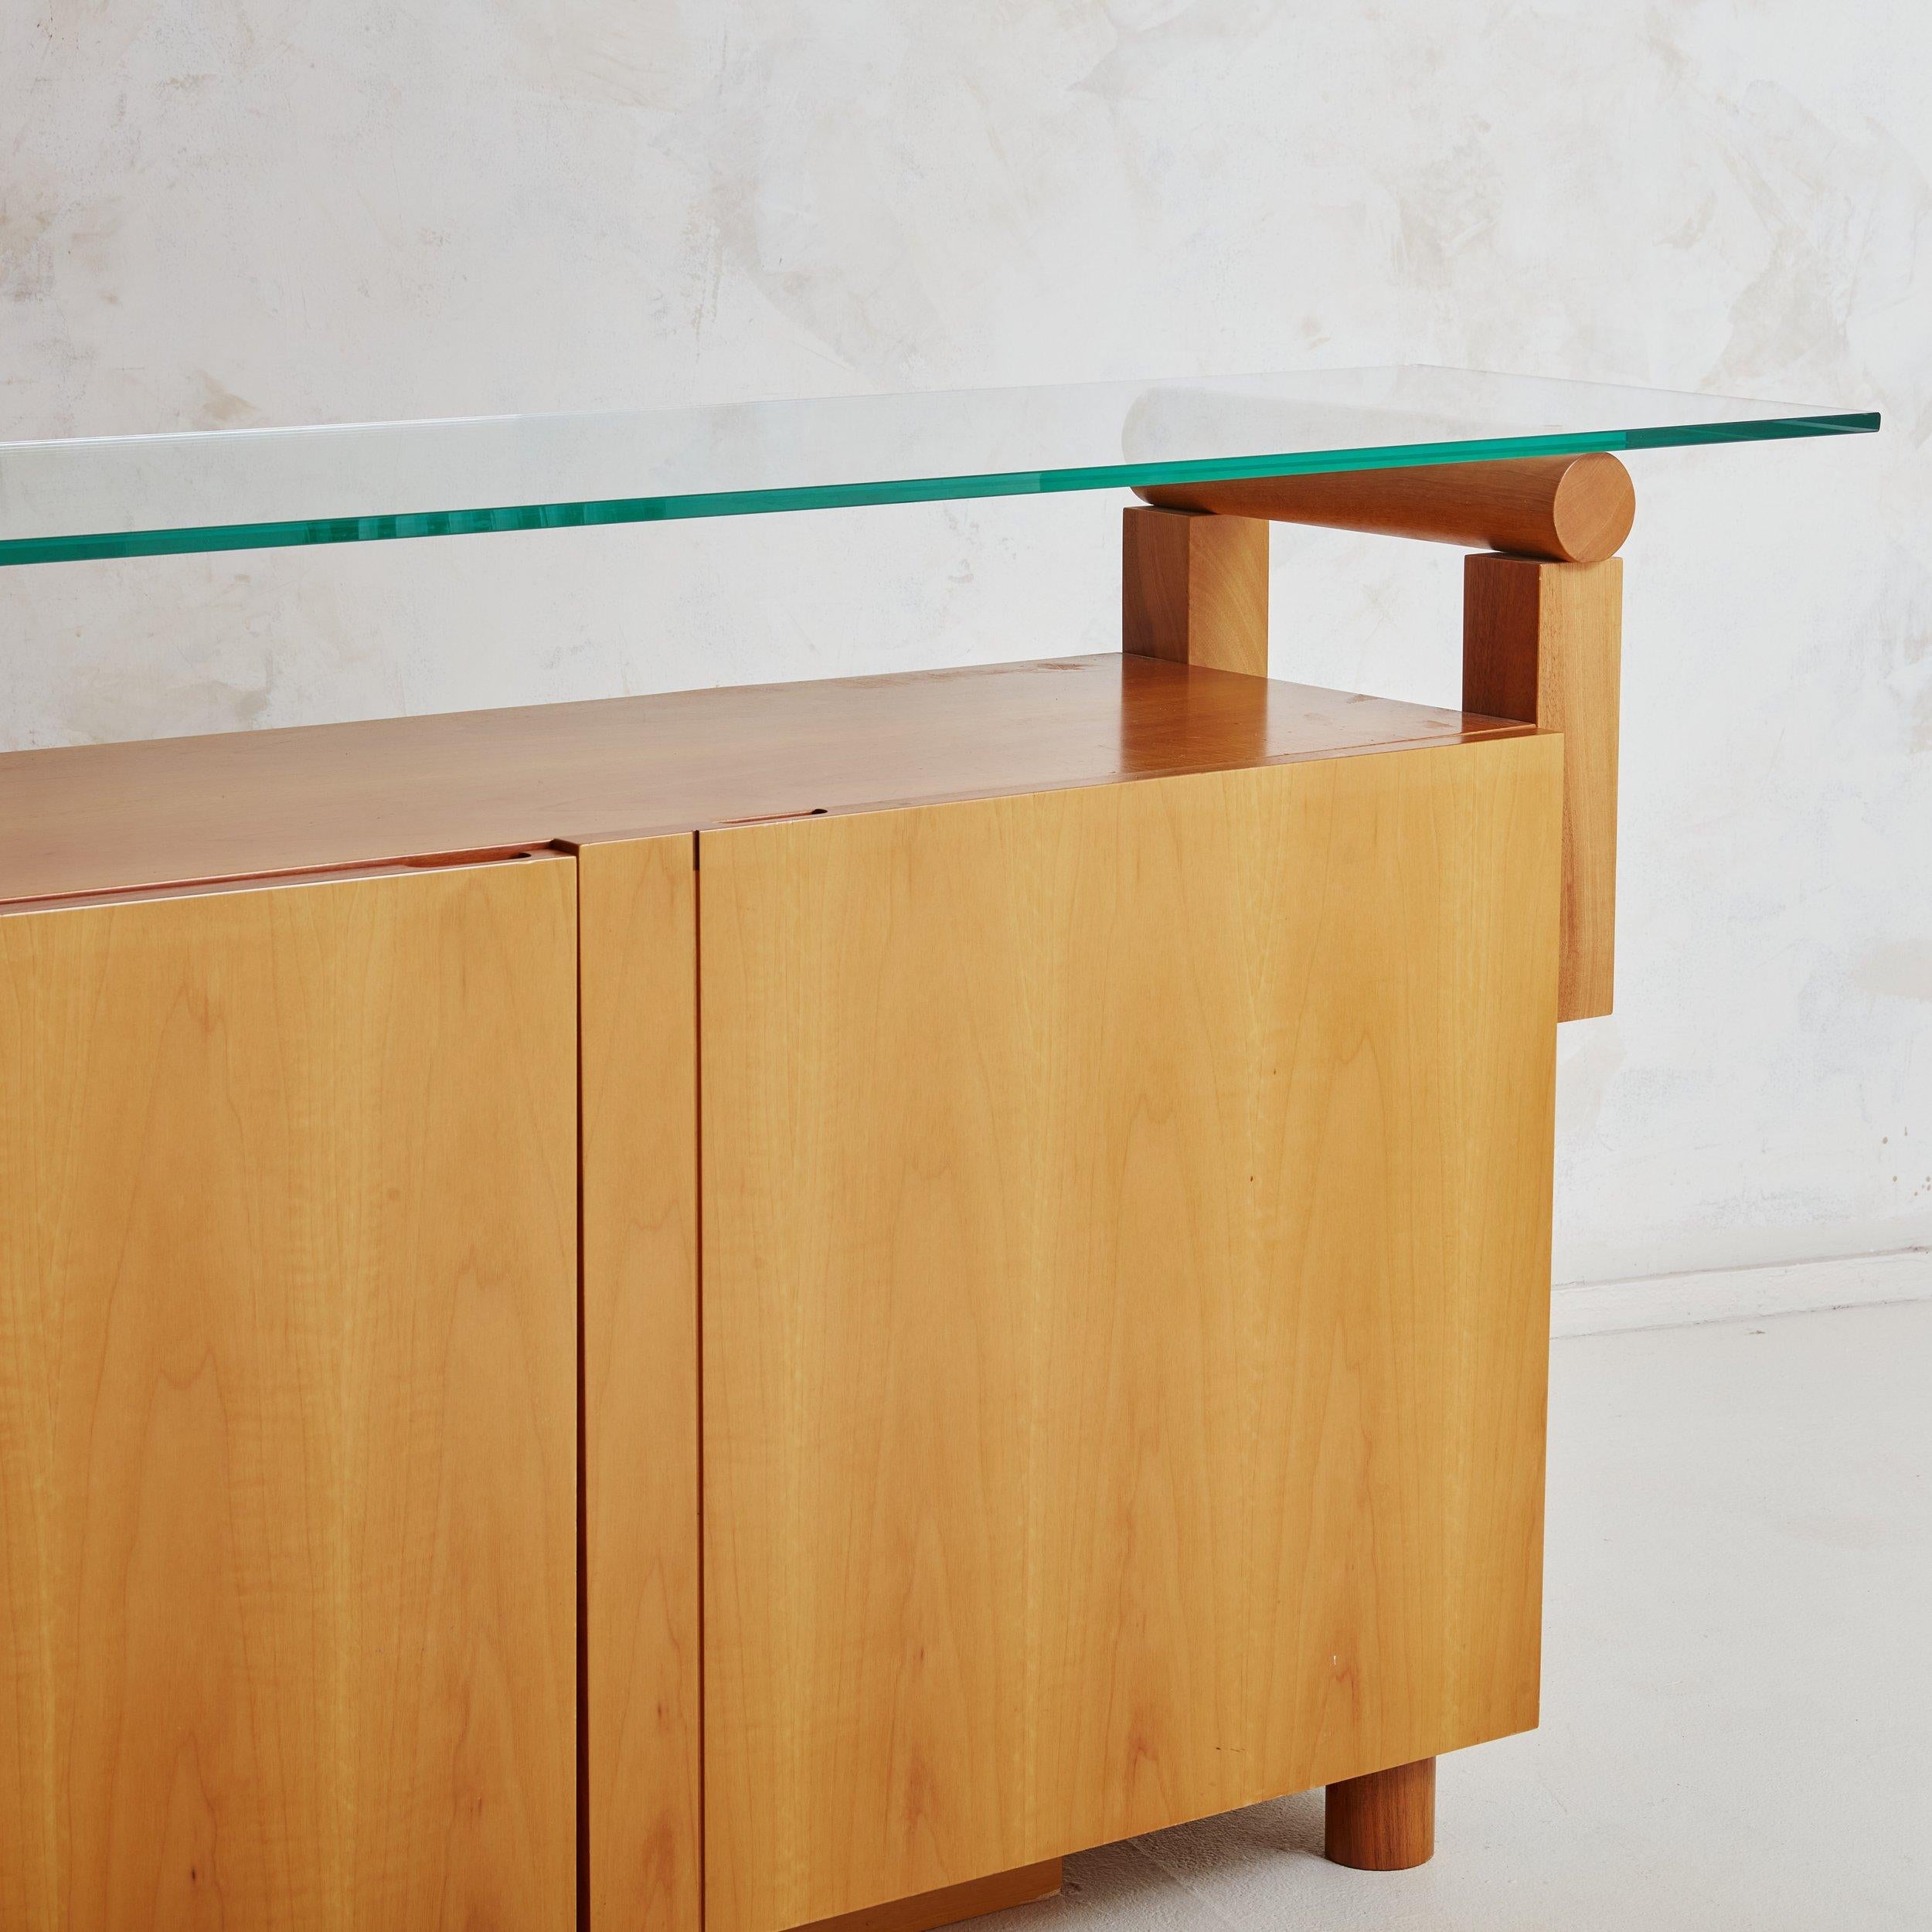 A Mid-Century Modern wood and glass shelf credenza from the 1980s. The monumental scale of this credenza is rare, featuring four flat paneled doors that reveal two shelves and separate storage spaces. The honey tinged wood has a slight sheen with